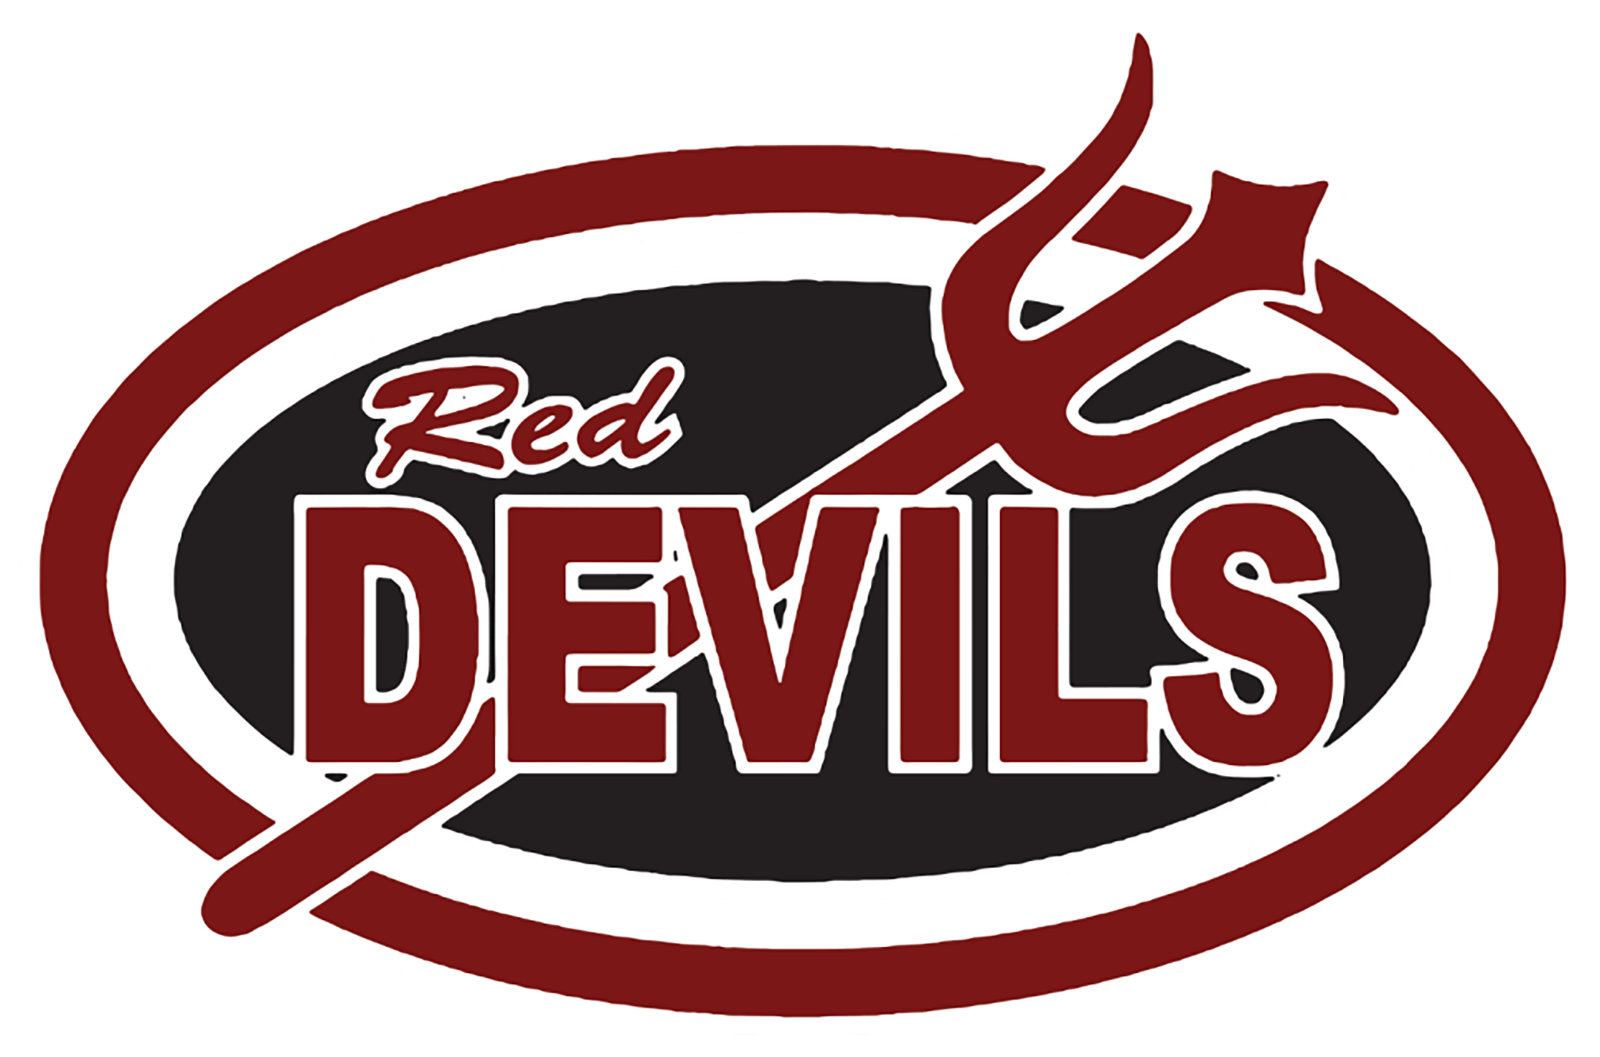 For School Red Devils Logo - Lowell - Team Home Lowell Red Devils Sports